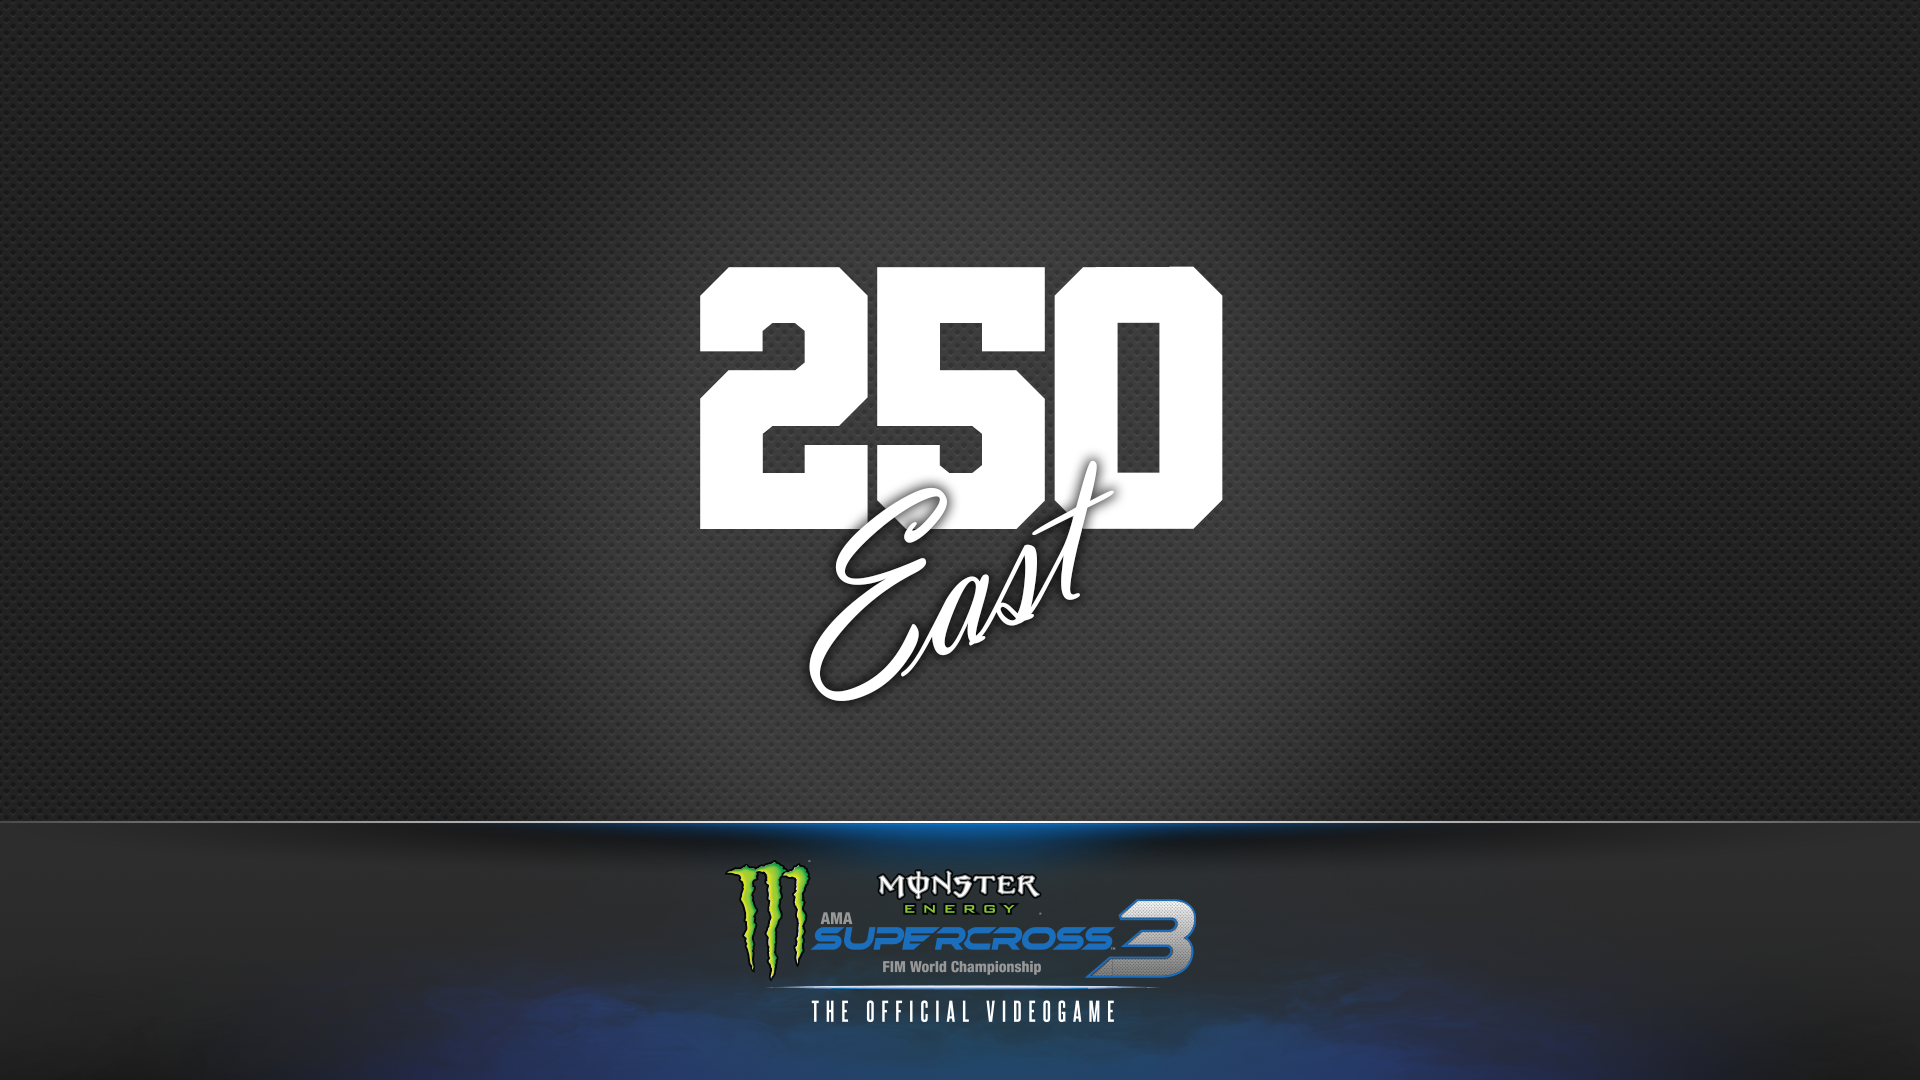 Icon for 250 East Champion